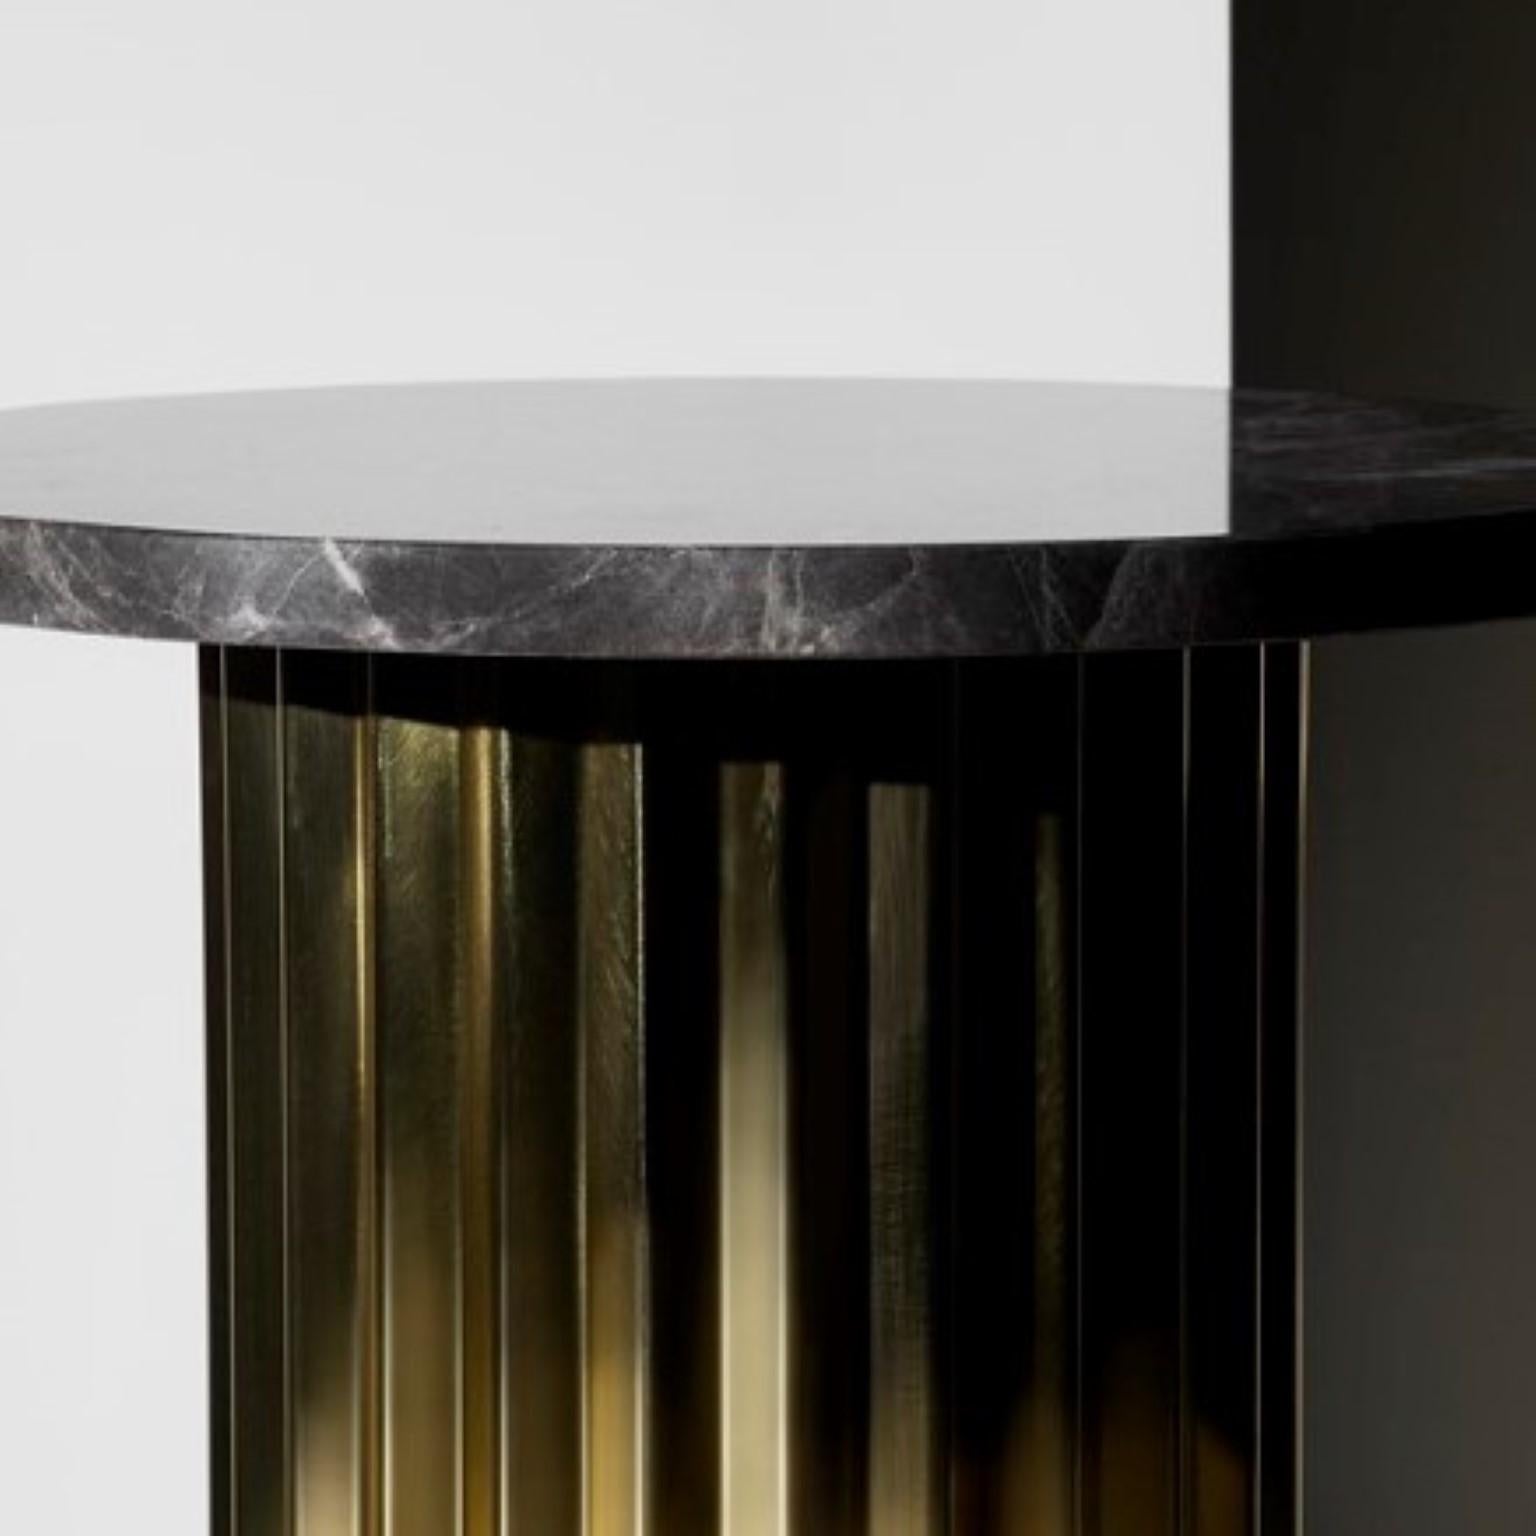 Column lounge table by Lisette Rützou
Dimensions: D 60 x H 41 cm
Materials: Brass column with marble tabletop
Also available Ø 40

 Lisette Rützou’s design is motivated by an urge to articulate a story. Inspired by the beauty of materials, form